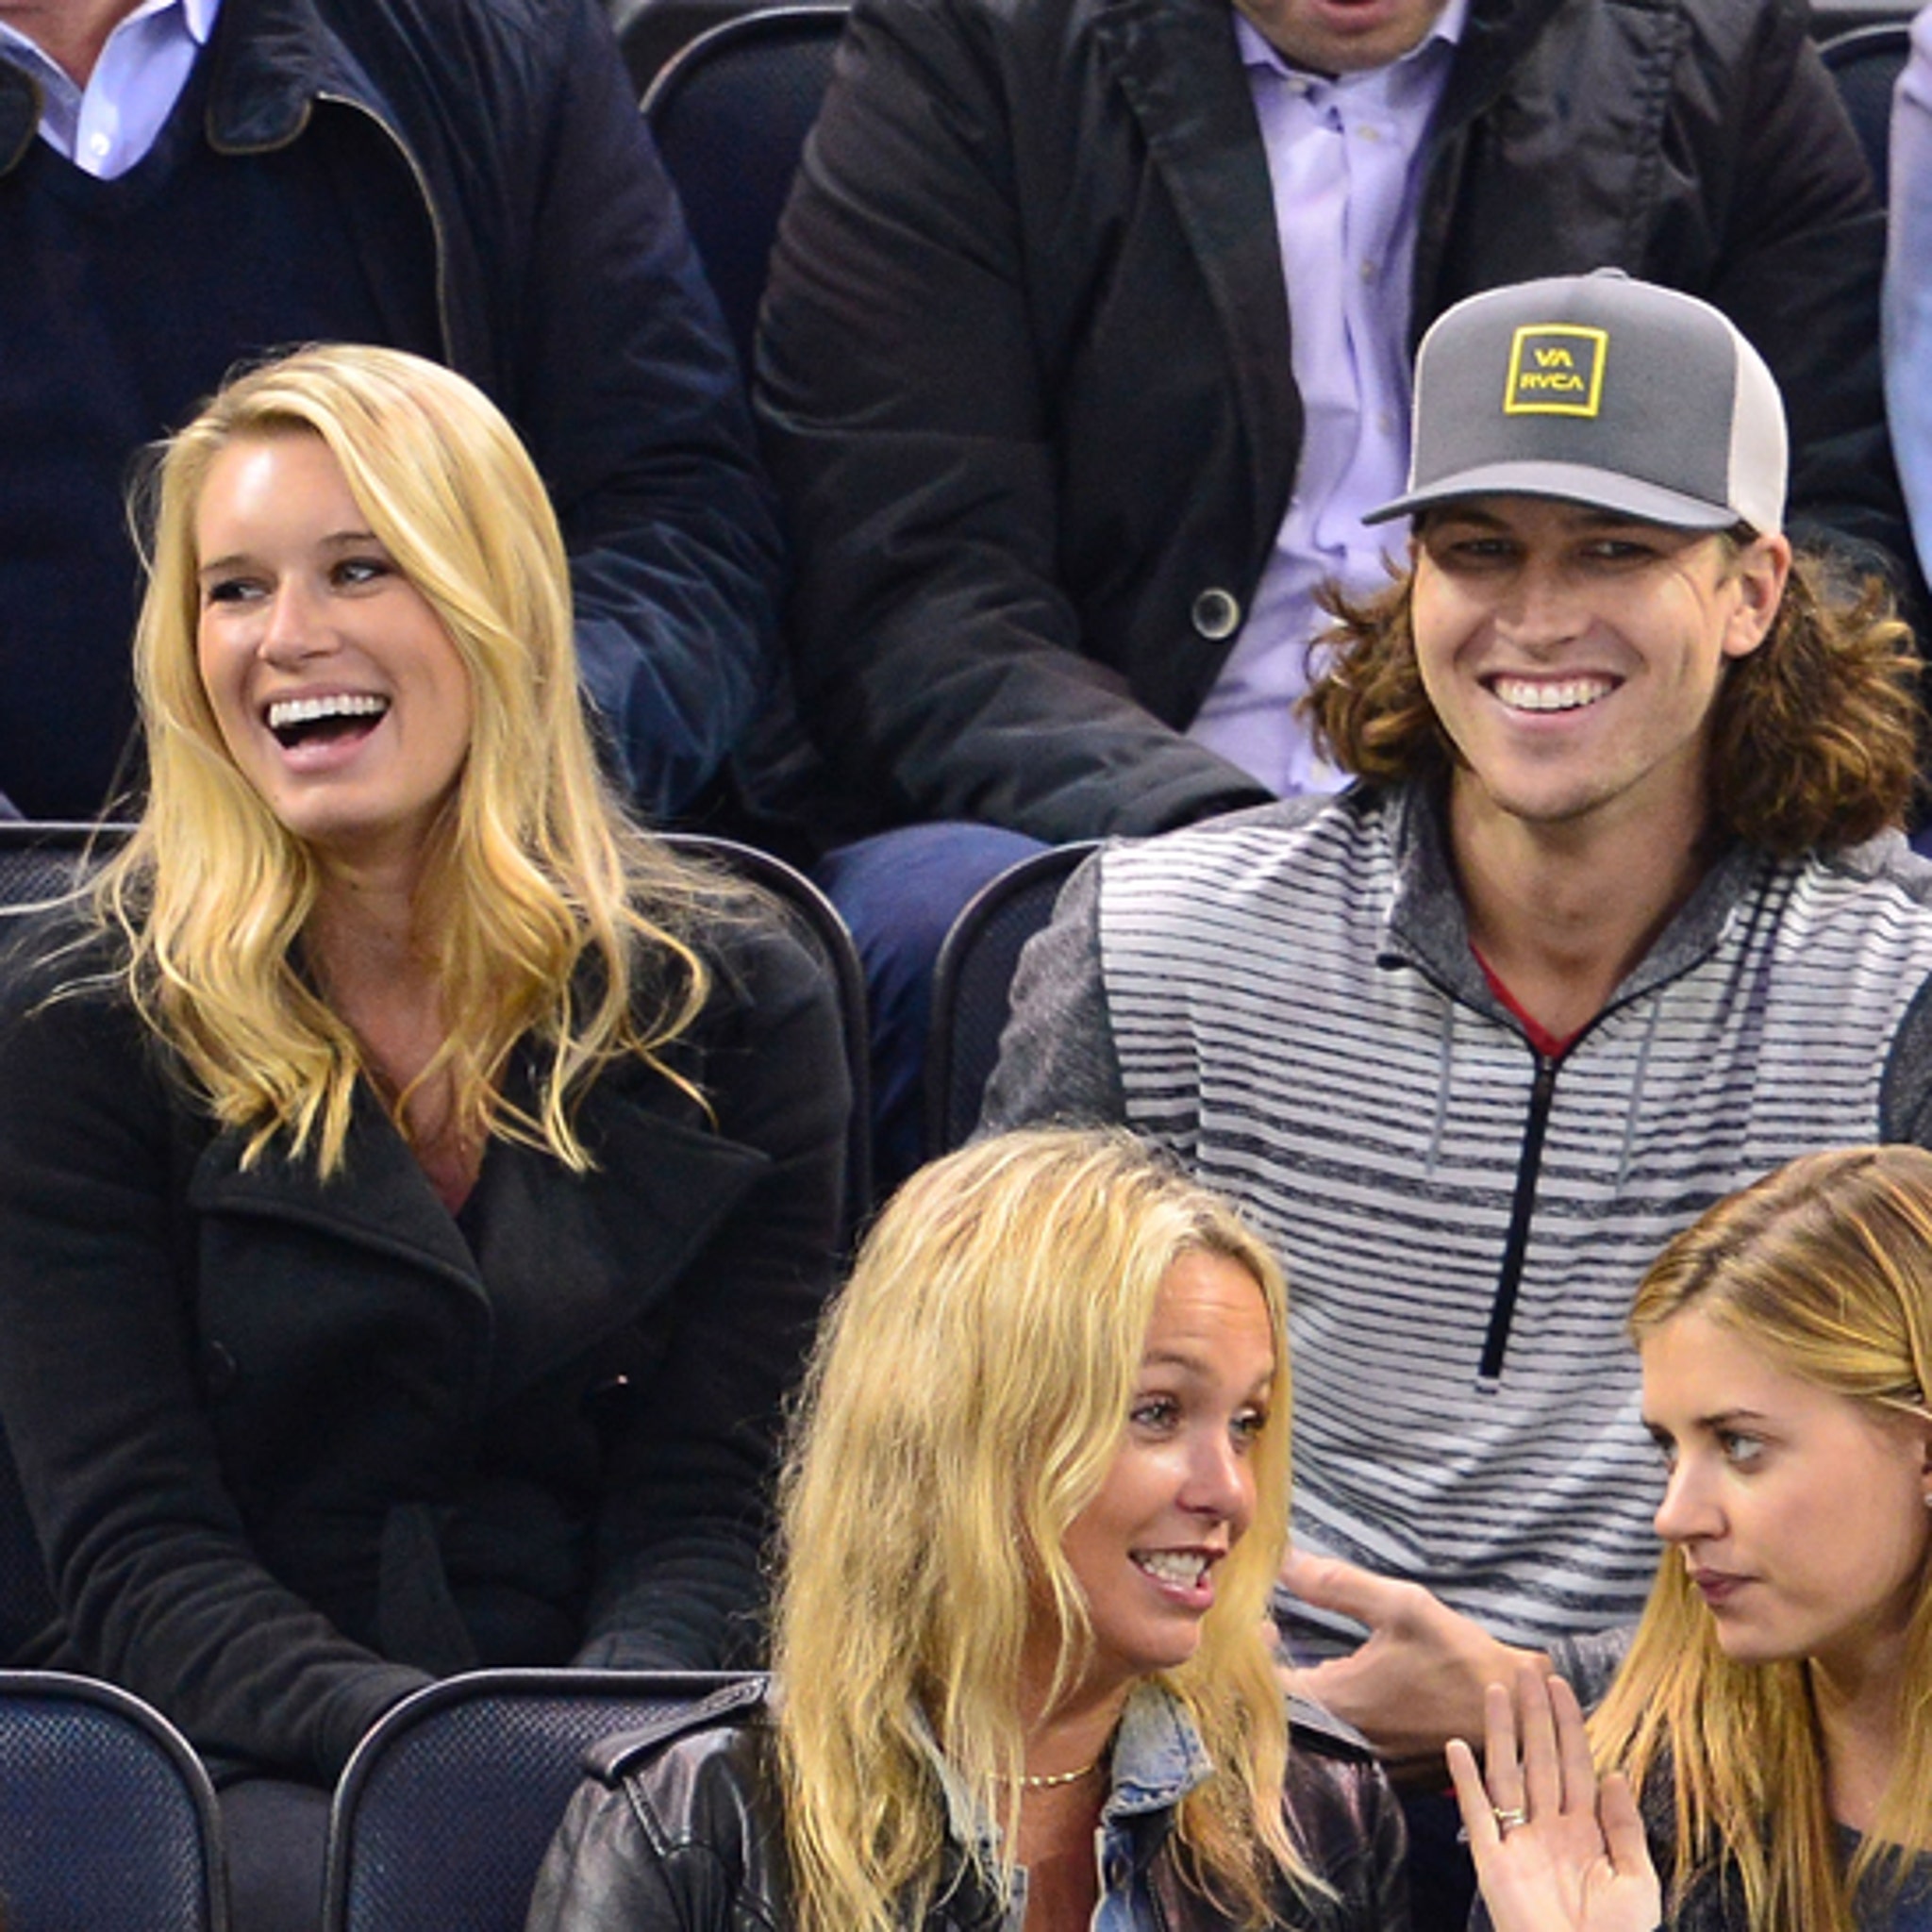 Jacob deGrom and Fiance -- Rink Side With Anne Burrell